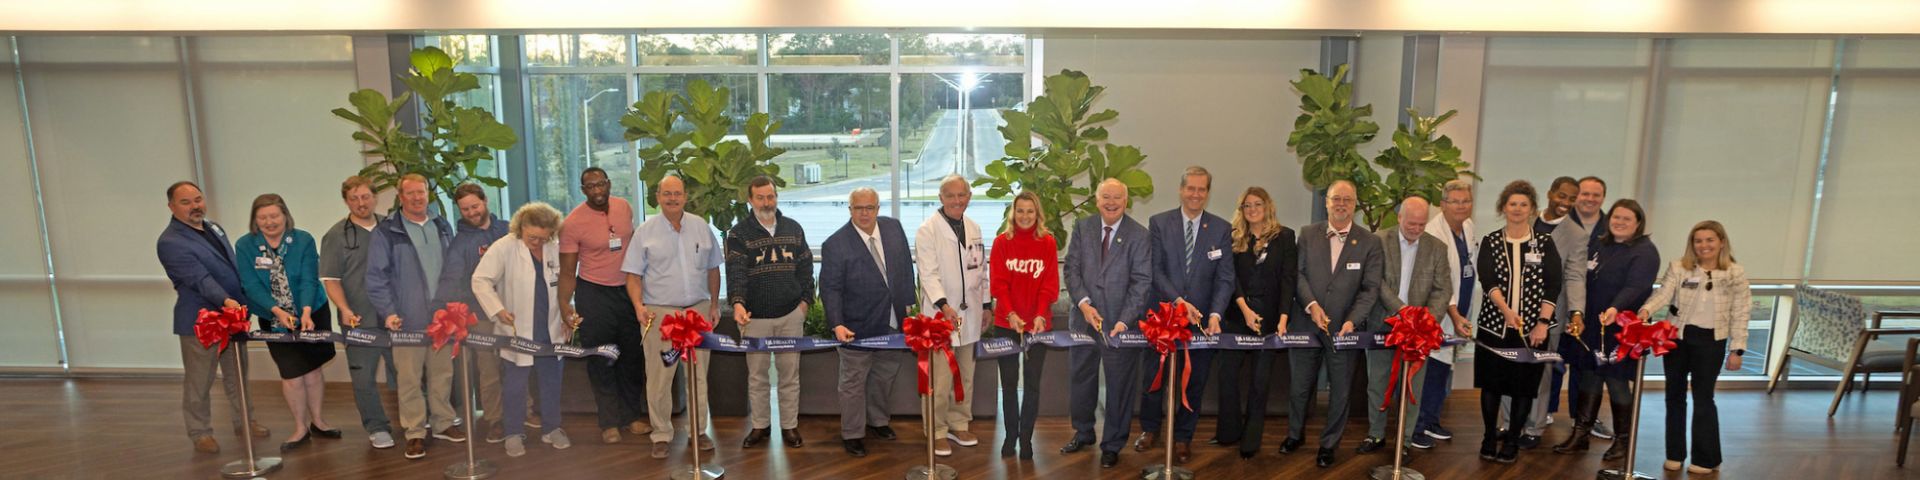 USA Health marks opening of West Mobile Medical Office Building